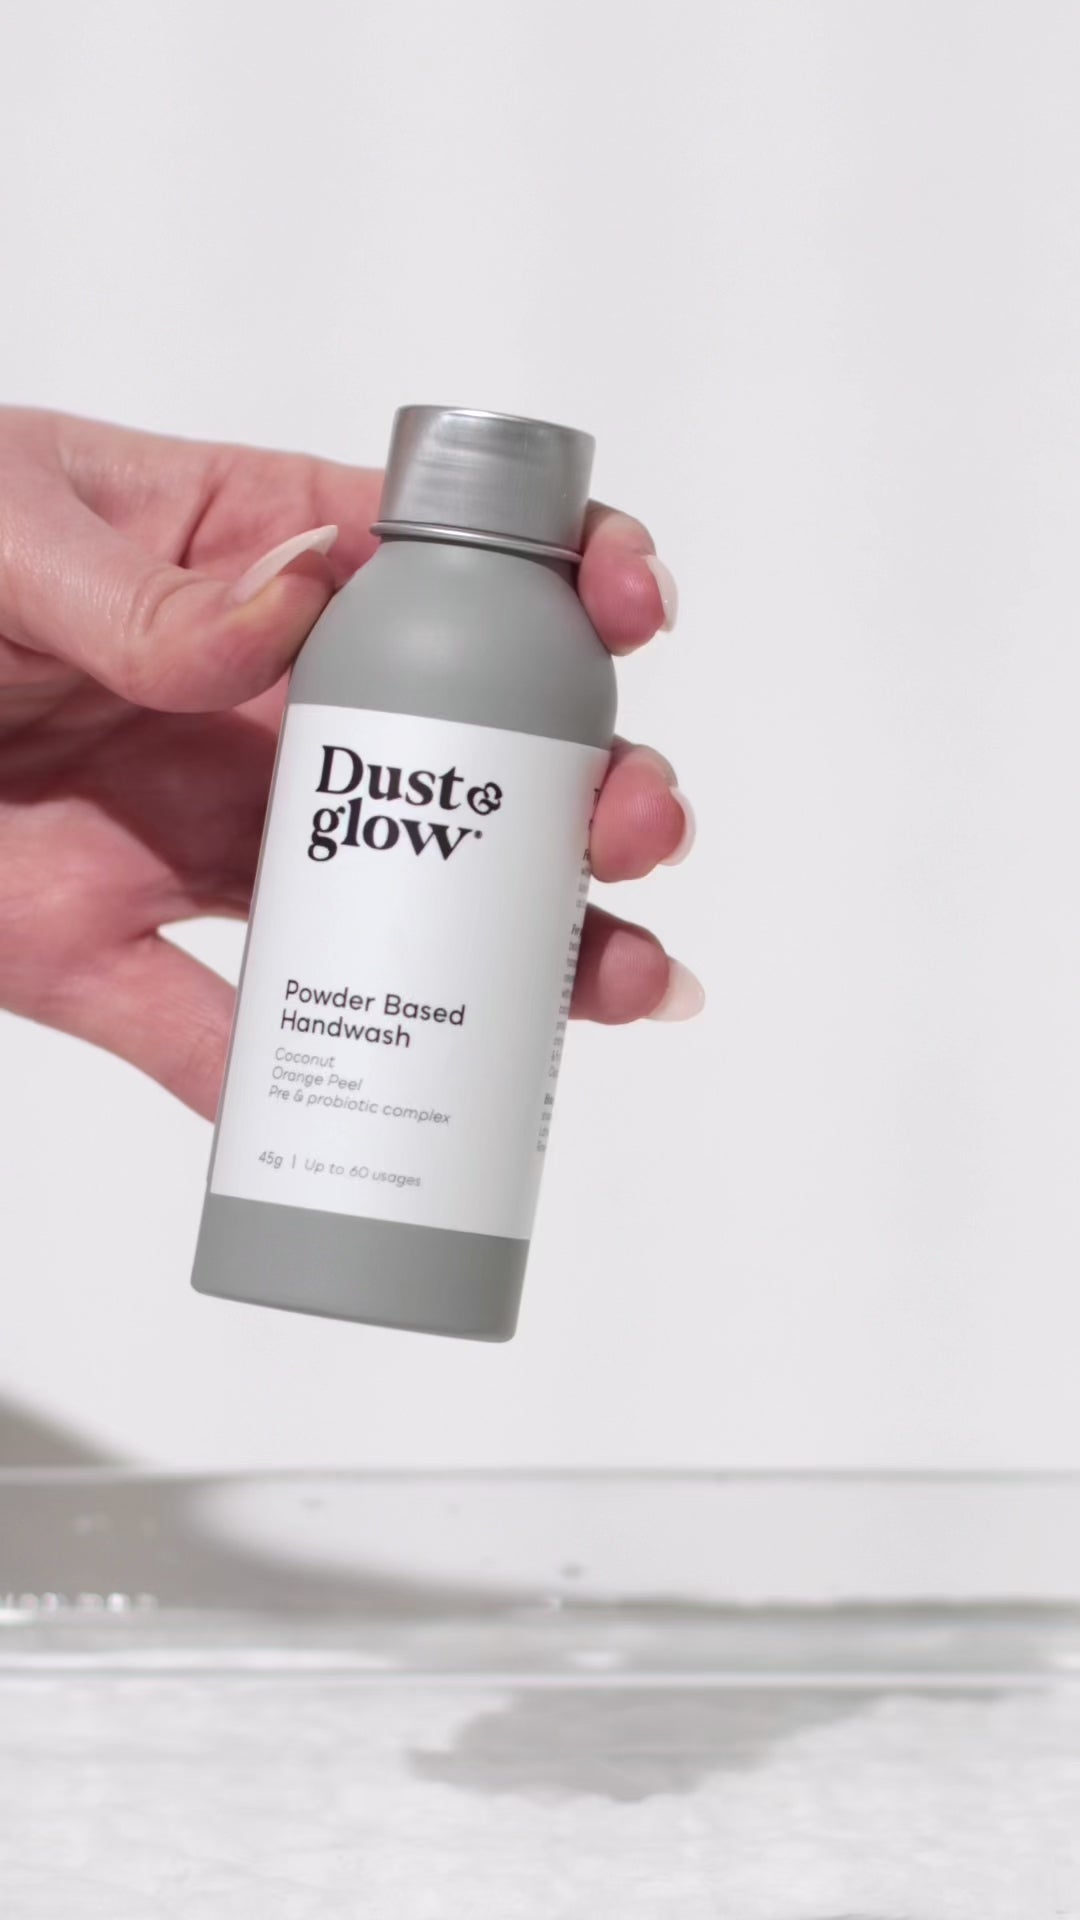 Dust&Glow Powder Based Handwash. A vegan, cruelty free, palm-oil free handwash concentrate reimagined in powder form. Super easy to use. No mixing or prep work required. NZ Made